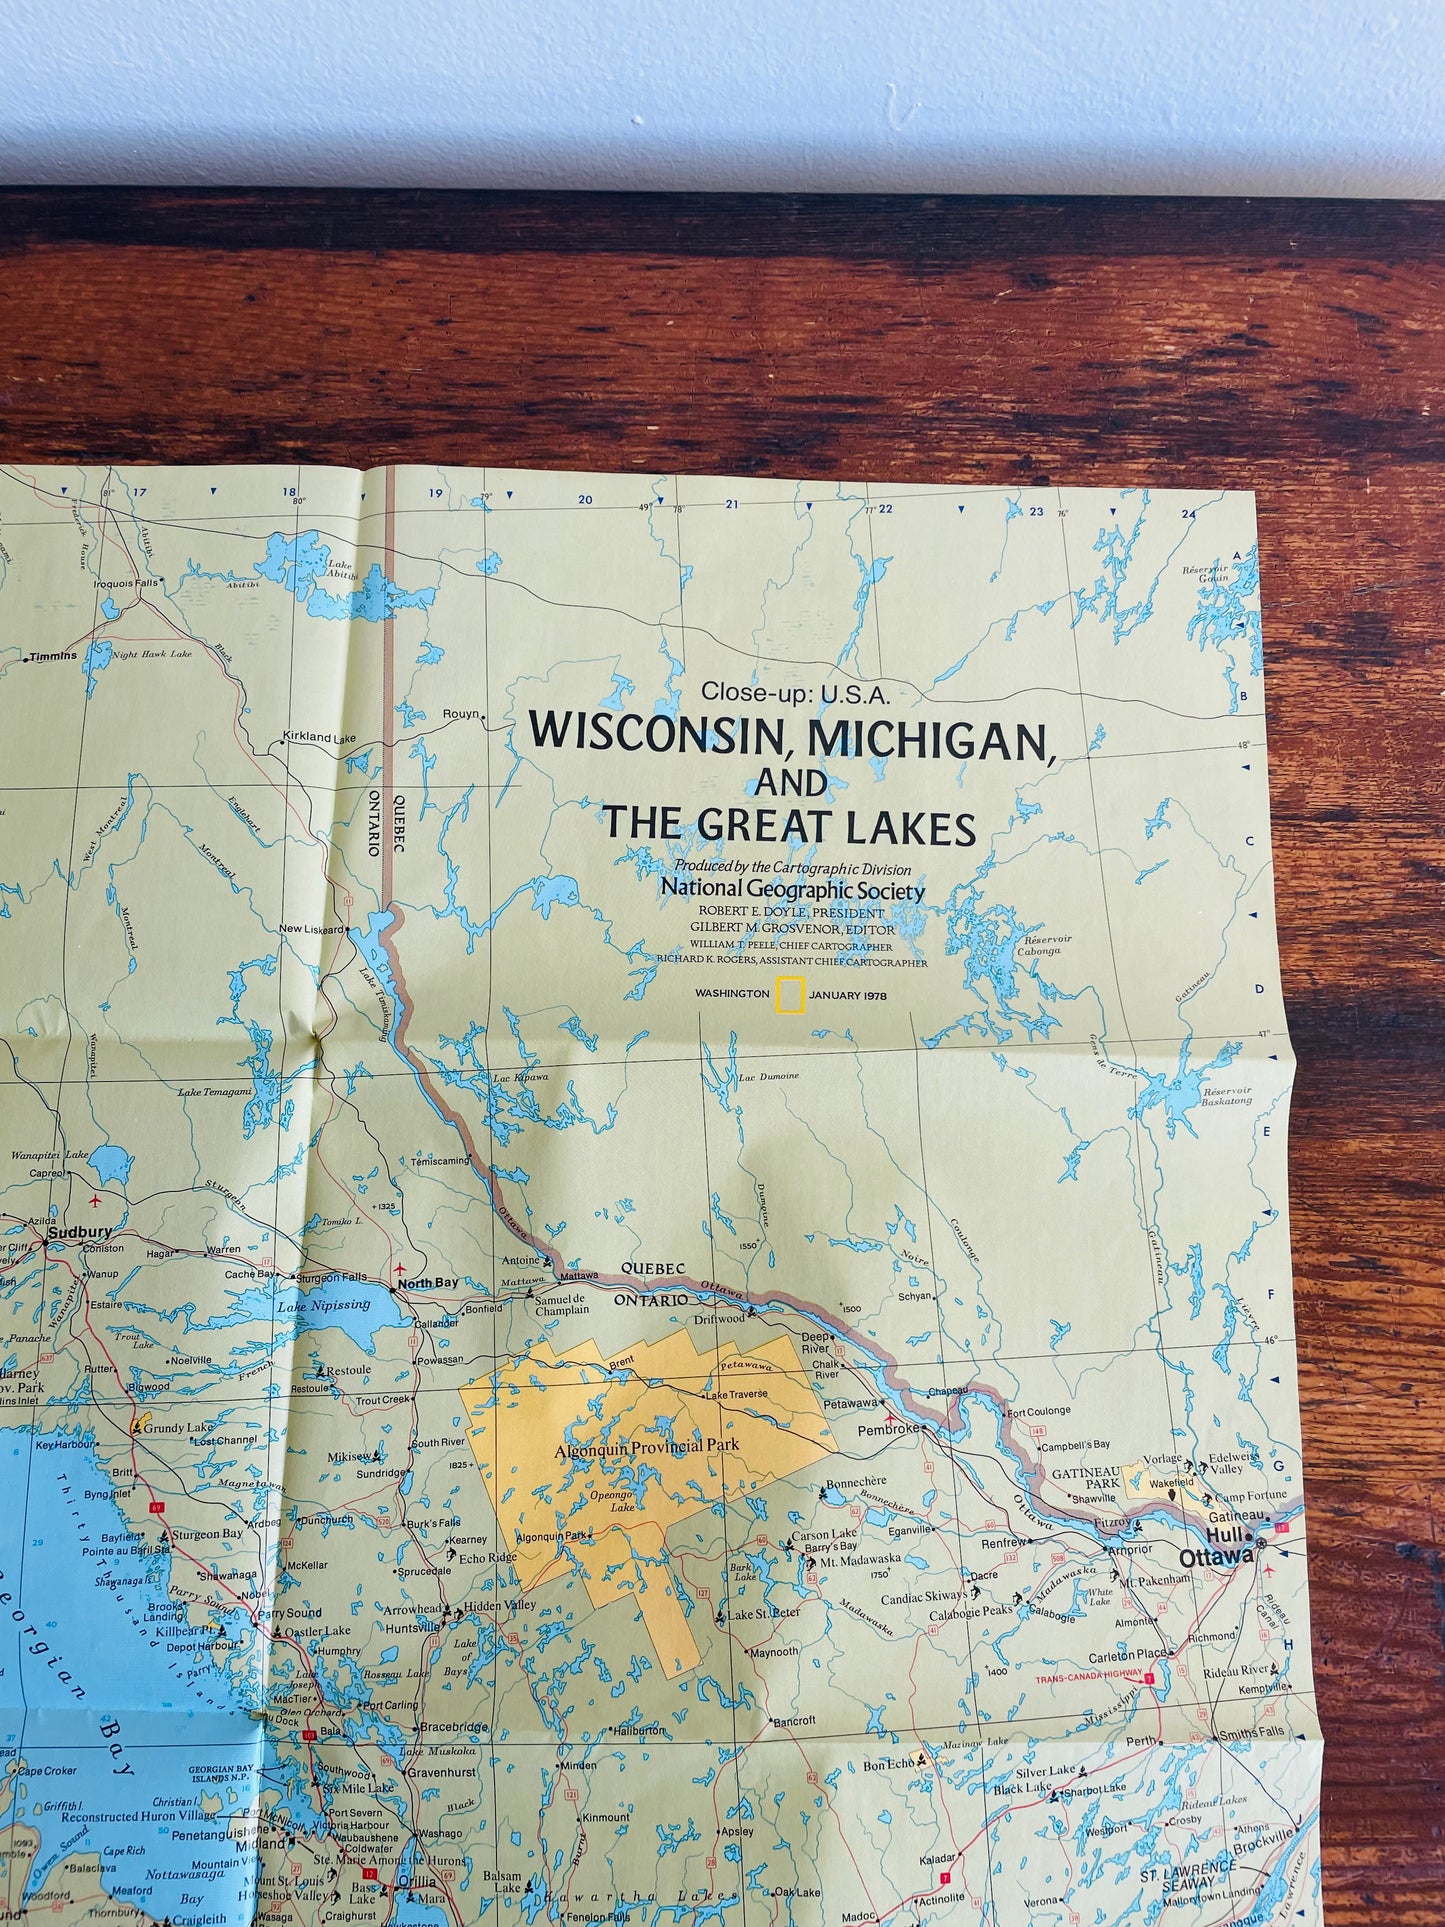 1978 National Geographic Close-Up USA Map - Wisconsin, Michigan, and The Great Lakes